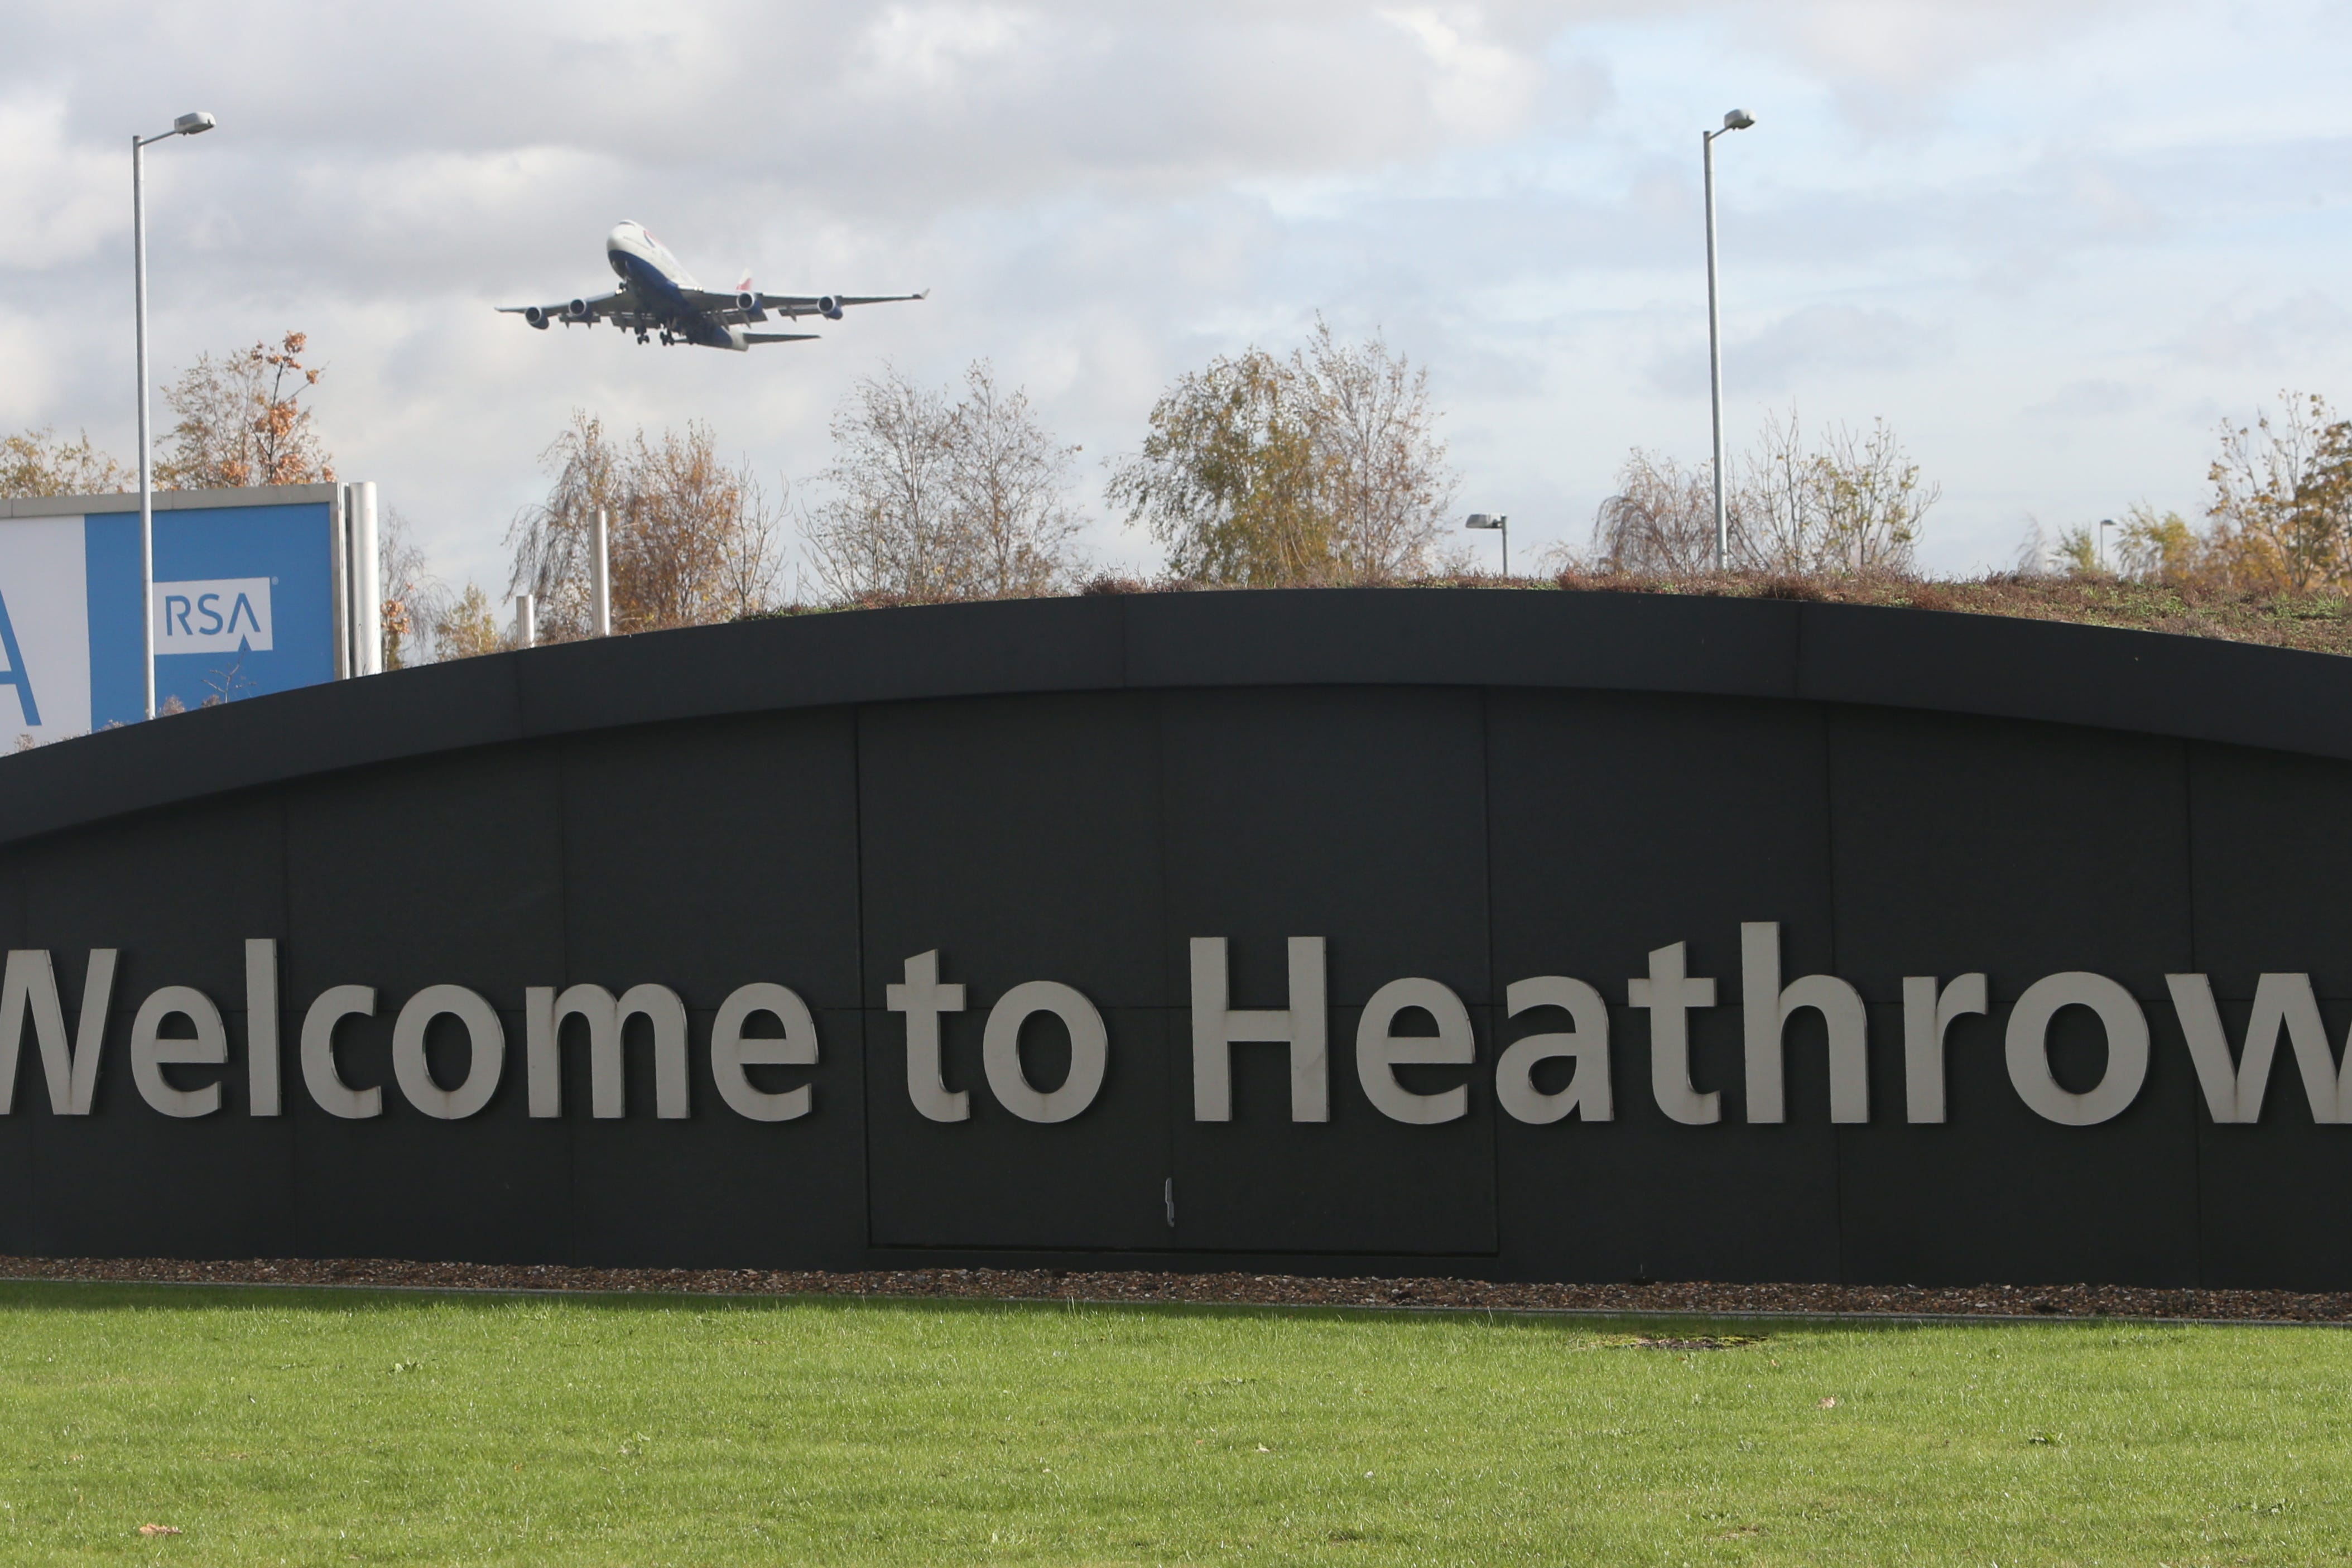 A plane taking off from Heathrow Airport (Steve Parsons/PA)